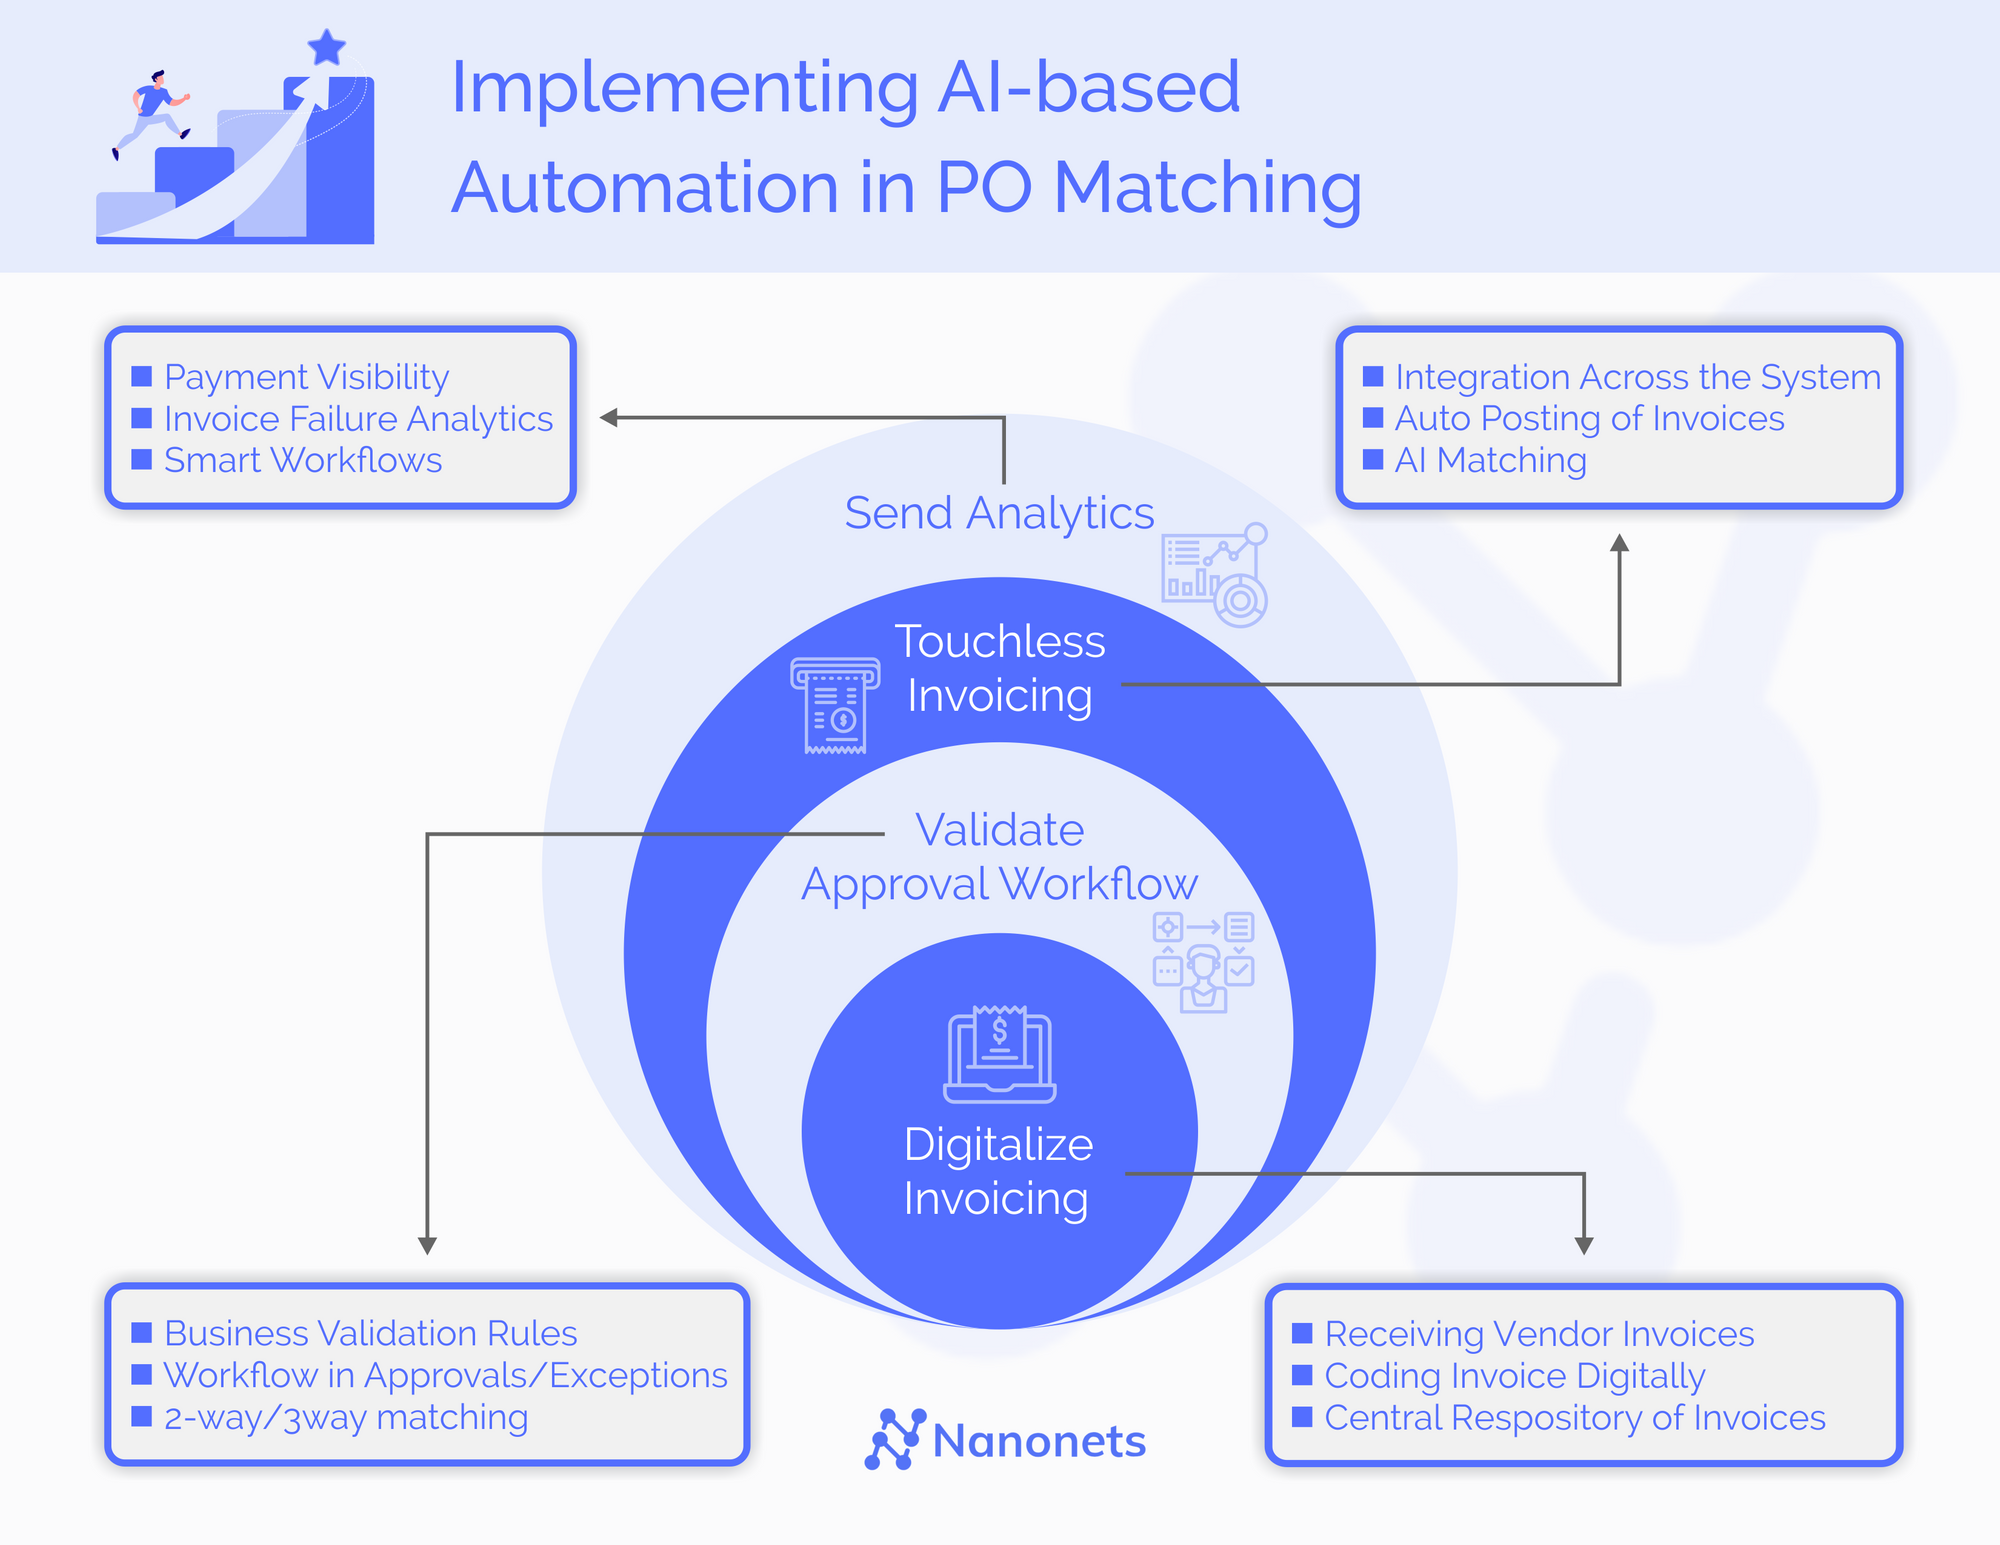 Implementation of AI-based automation in PO matching